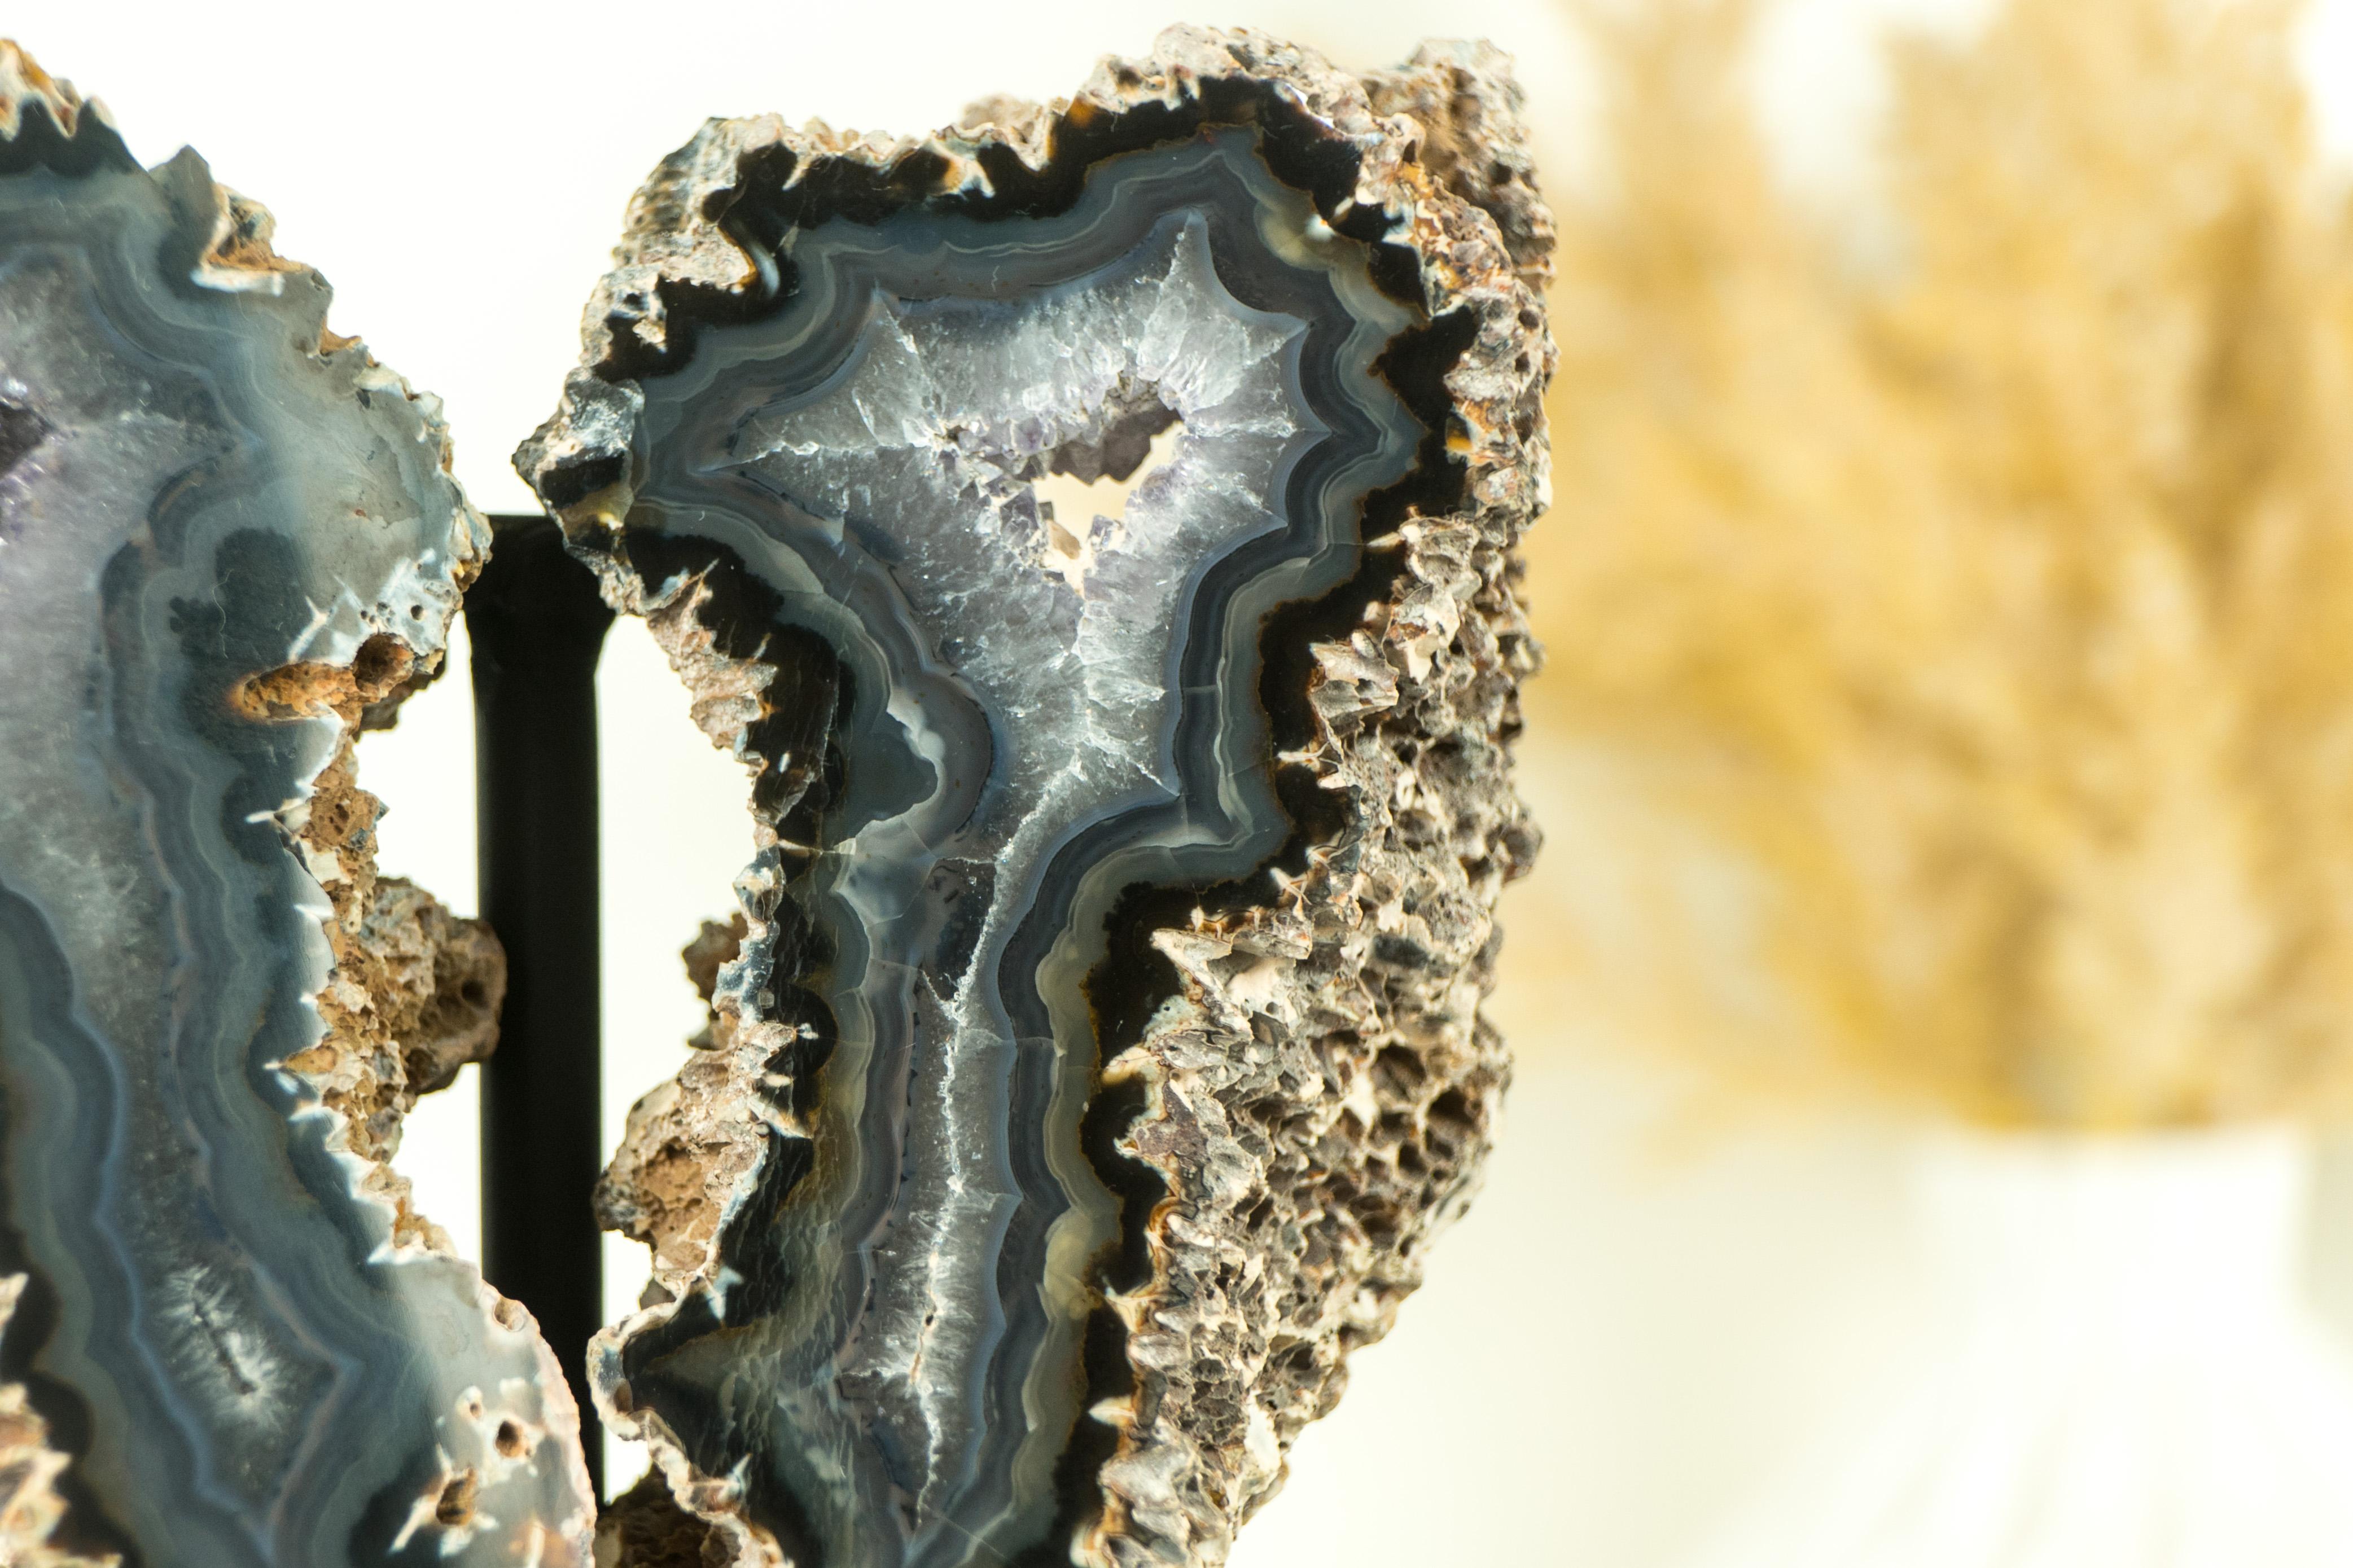 Small Spiky Lace Agate Geode with Druzy, in Butterfly Wings Format, Intact For Sale 7